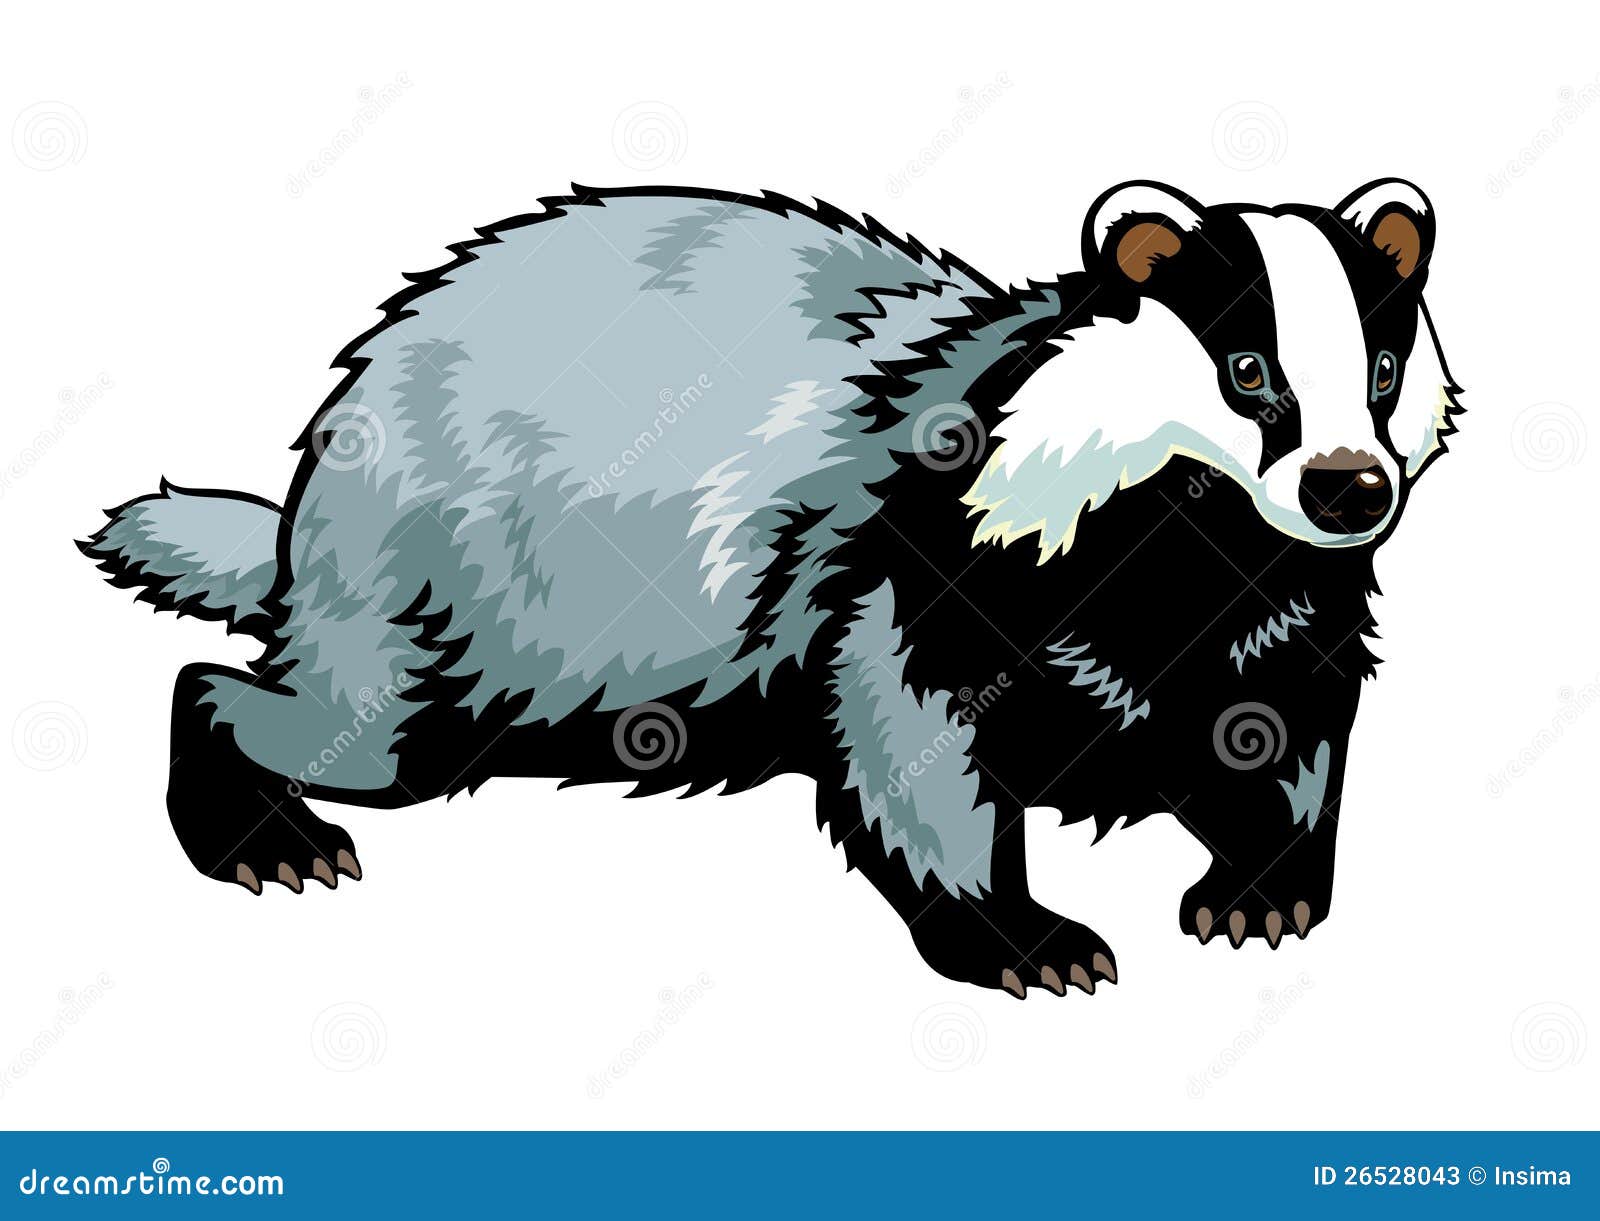 clipart badger - photo #49